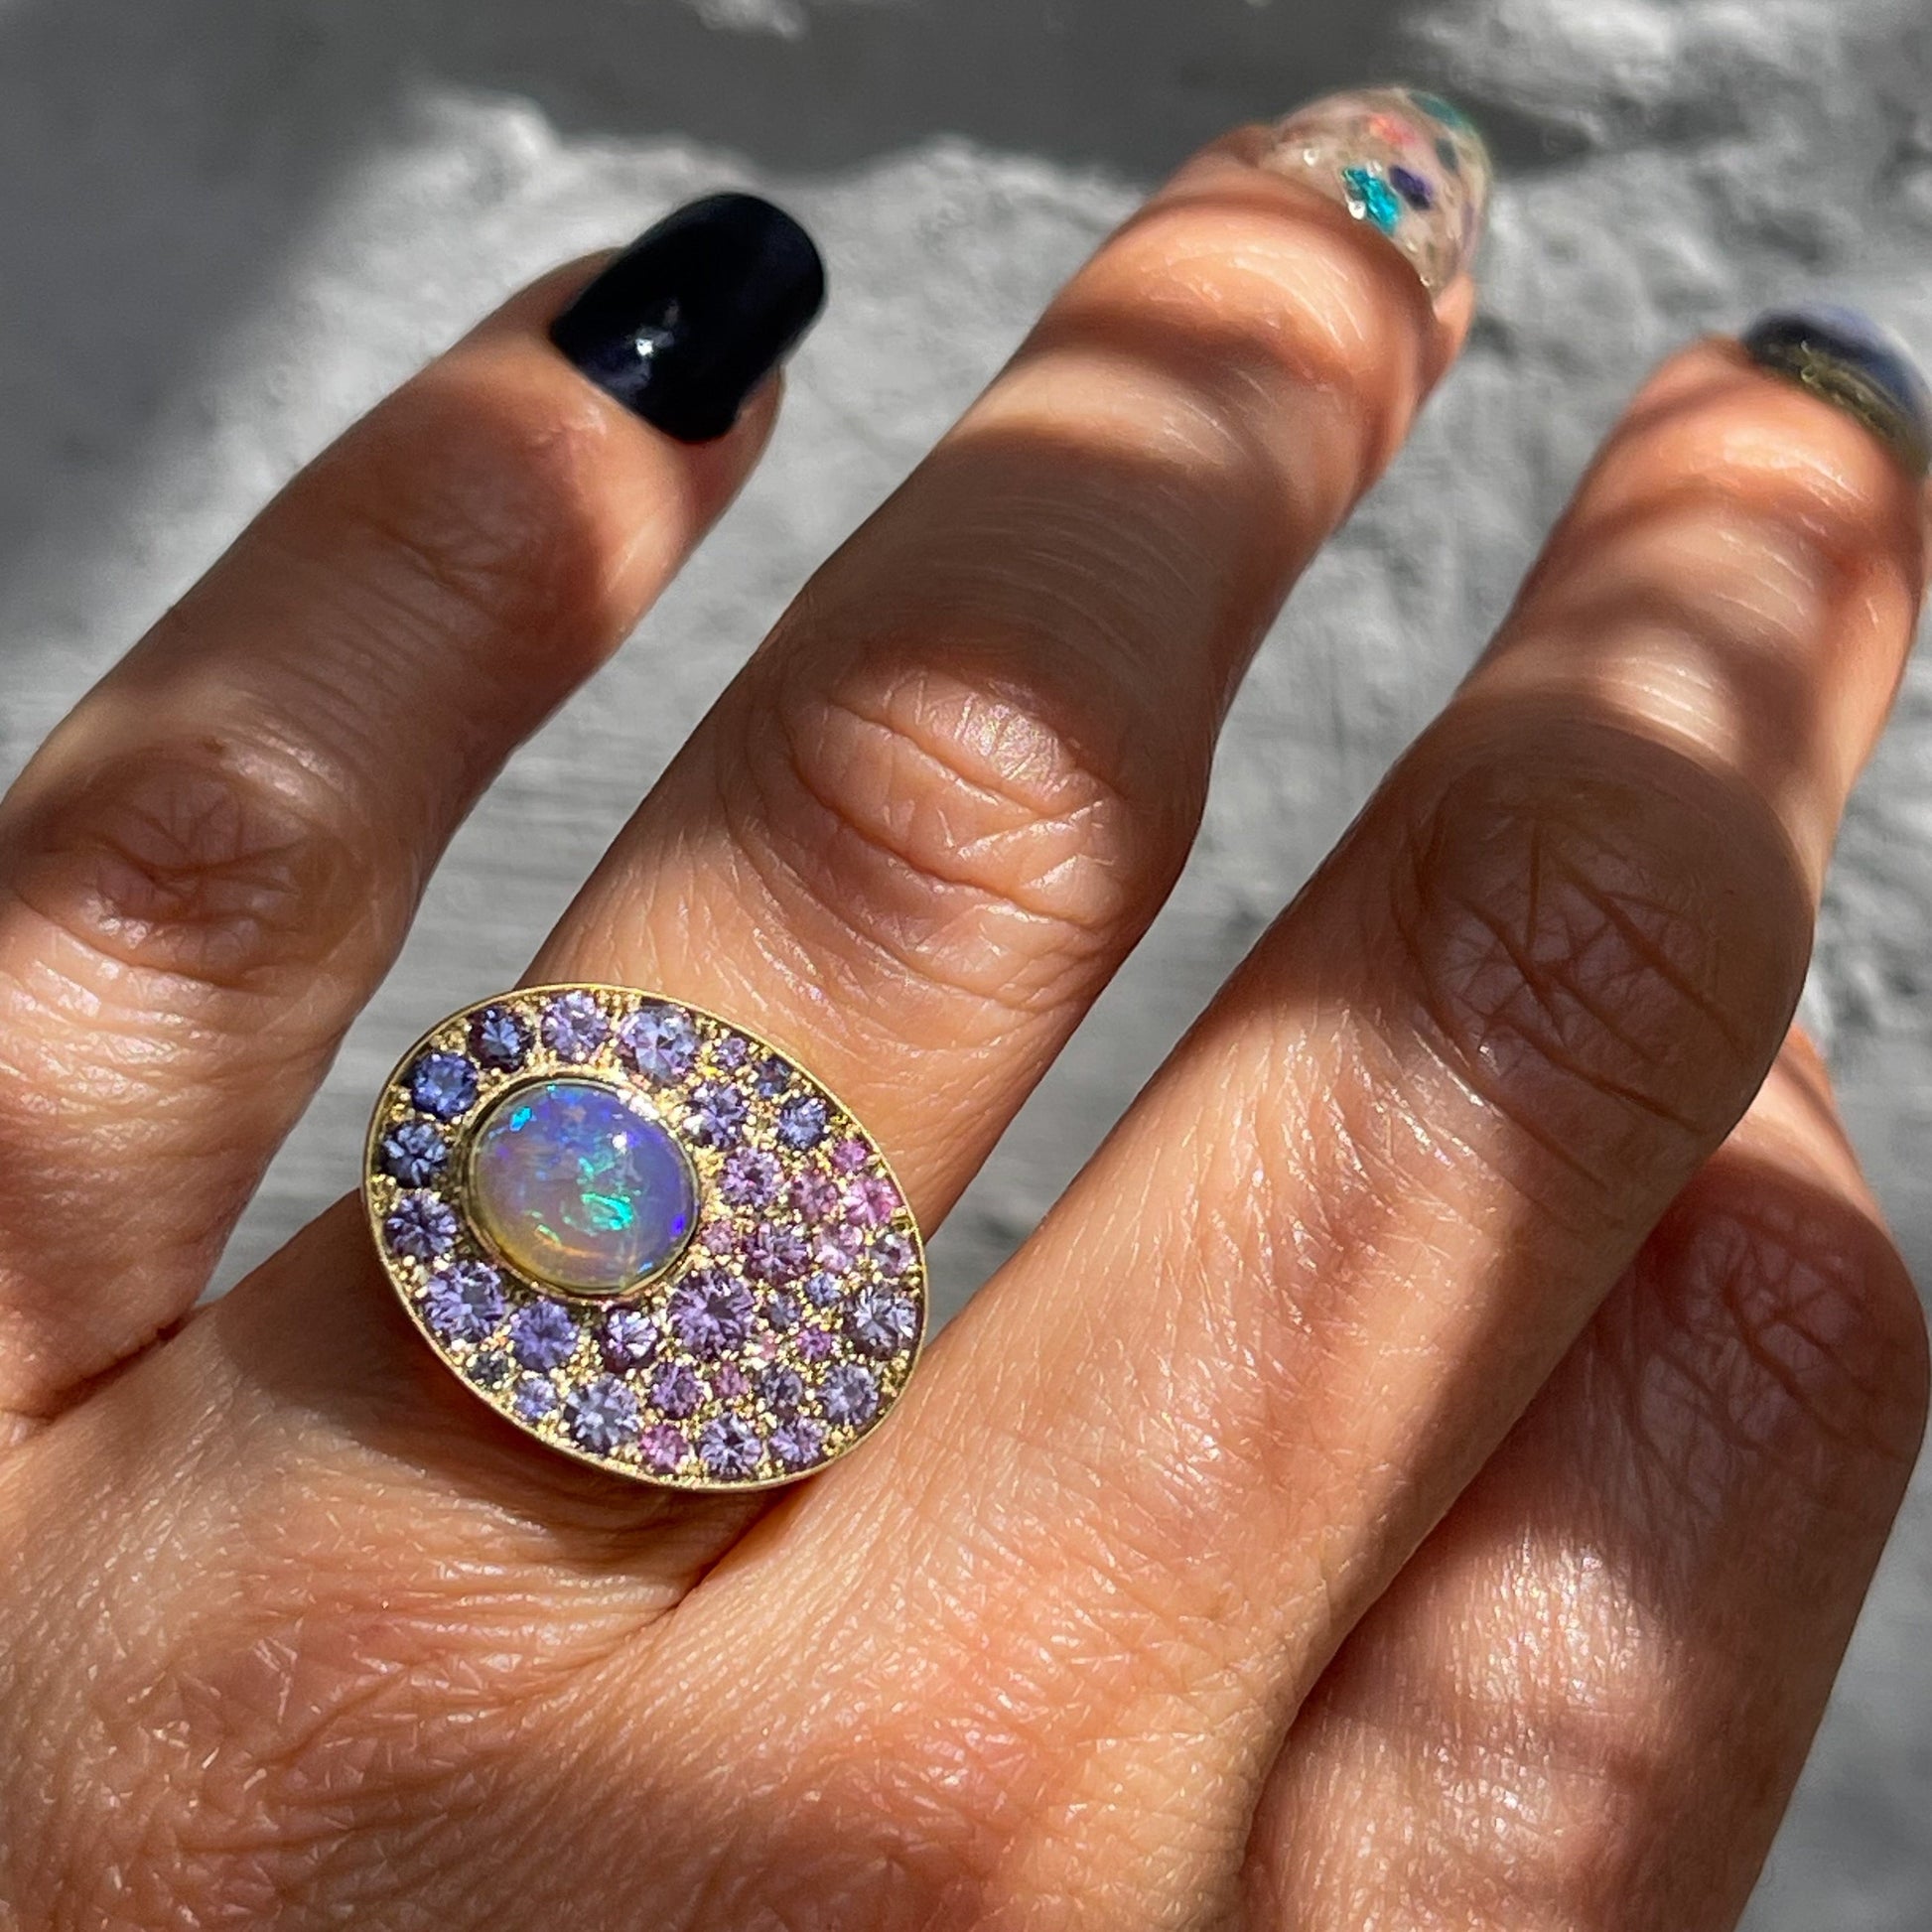 An Australian Opal Ring by NIXIN Jewelry modeled on a hand. The gold opal ring has a Lightning Ridge Opal and purple sapphires and is a one of a kind work of art.